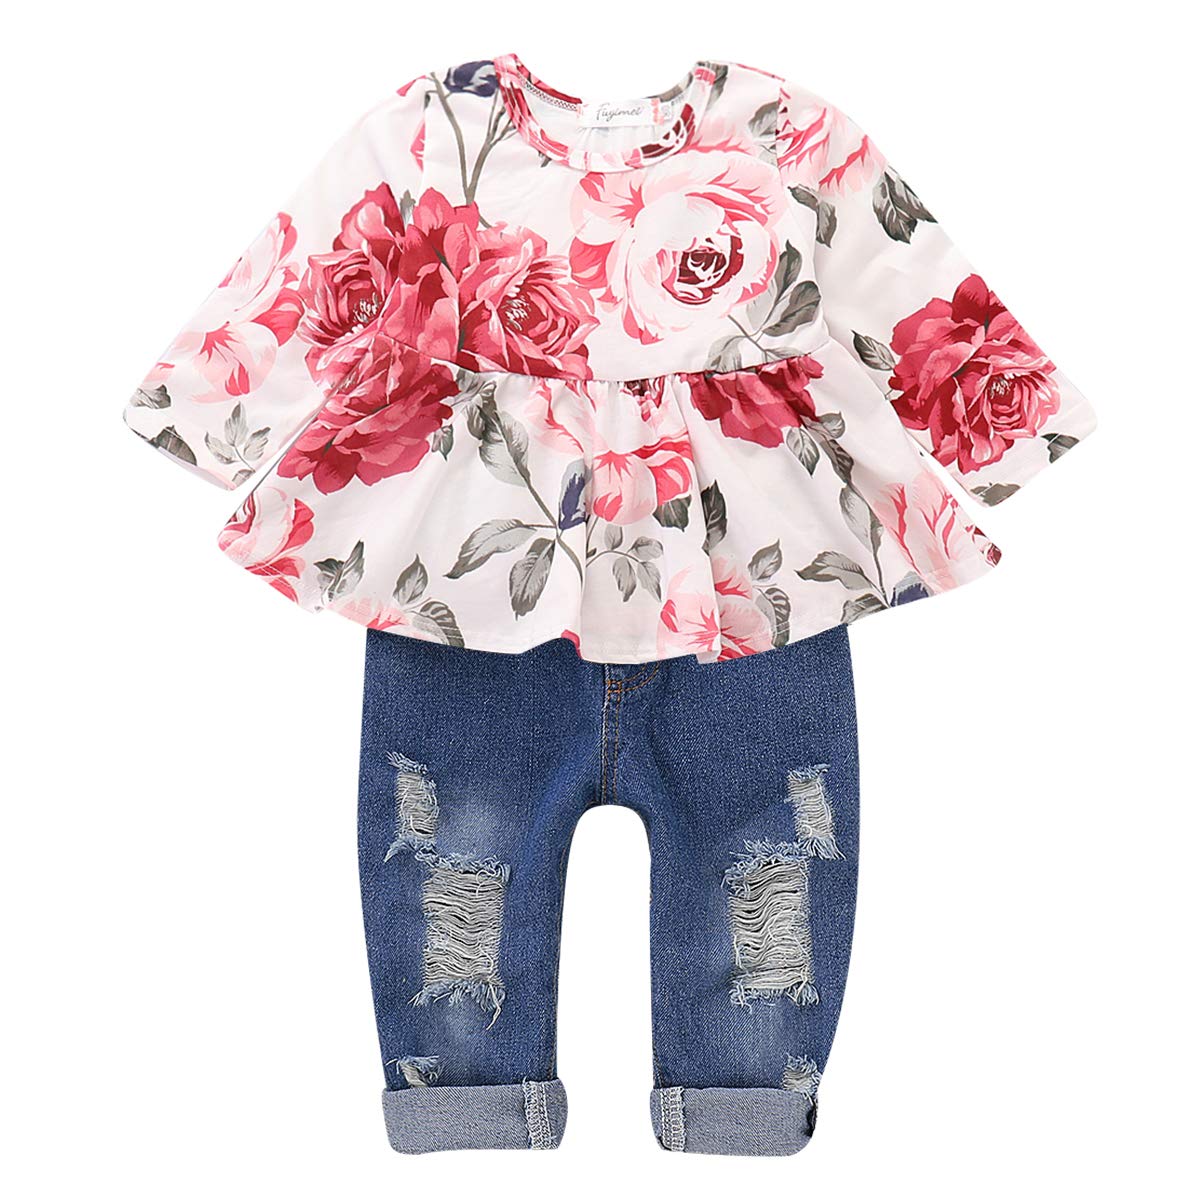 CARETOO Girls Clothes Outfits, Cute Baby Girl Floral Short Sleeve Pant Set Flower Ruffle Top